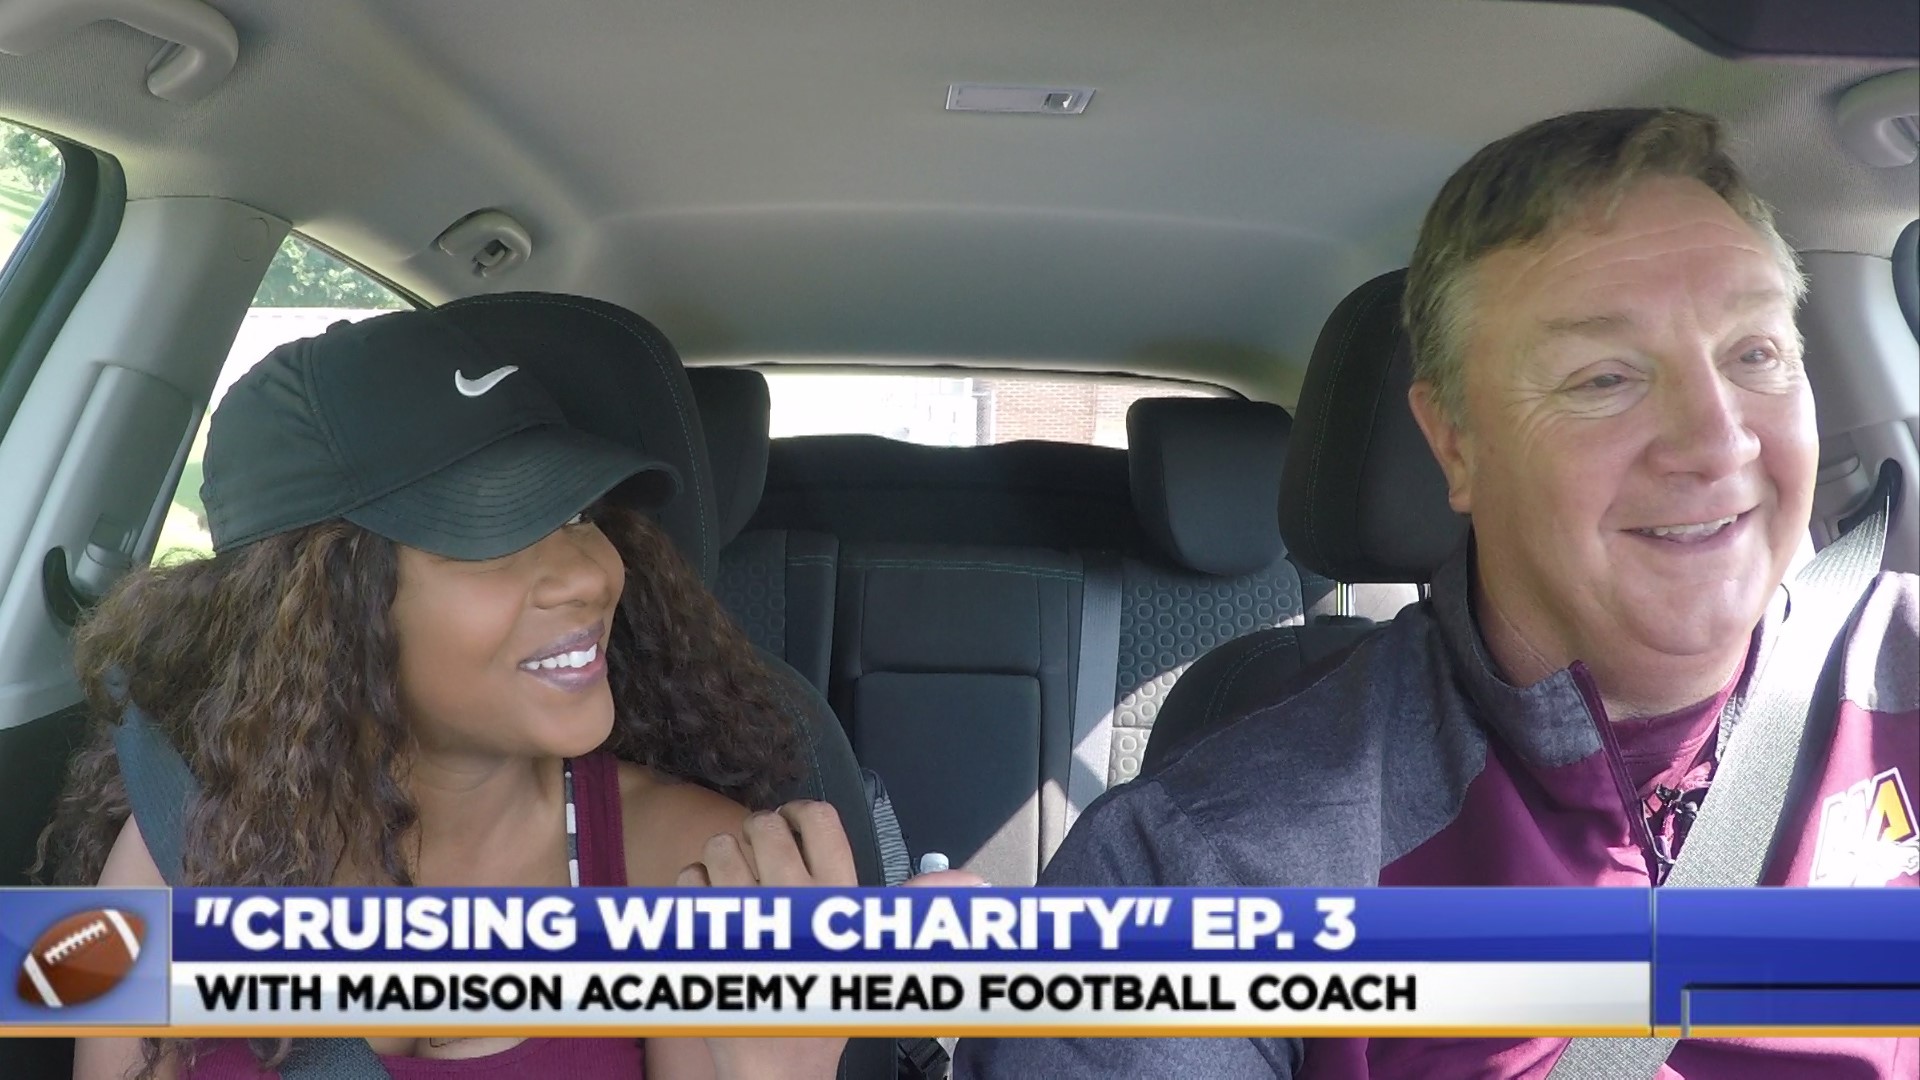 For the third episode of “Cruising with Charity, Charity rode alongside new Madison Academy Head Coach, Bob Godsey.